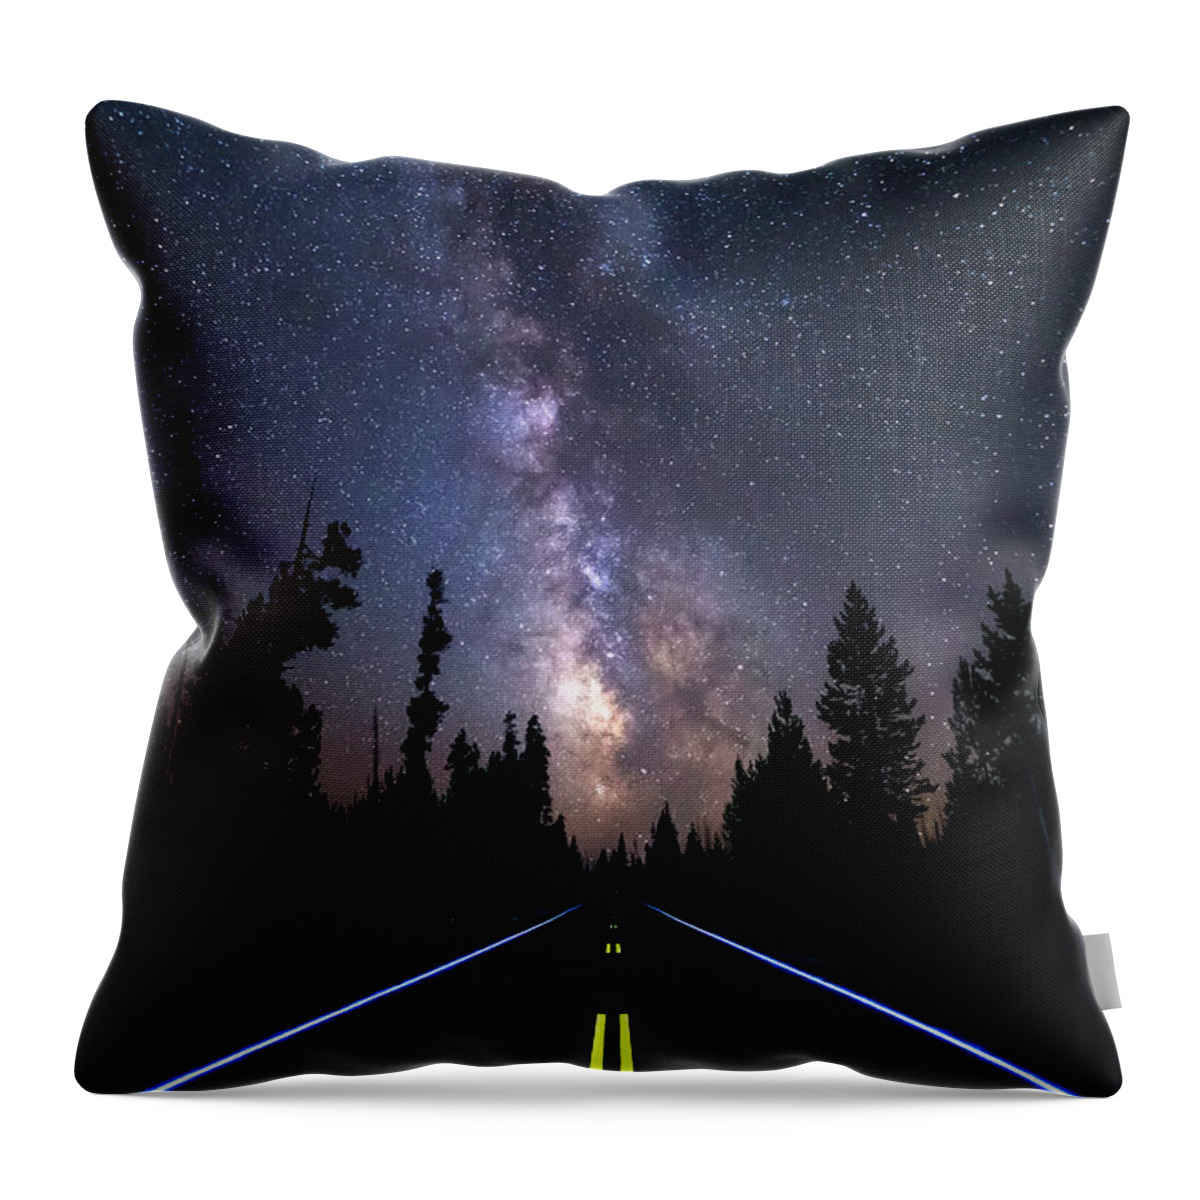 Roads Throw Pillow featuring the photograph Night Moves Into The Milky Way by James BO Insogna